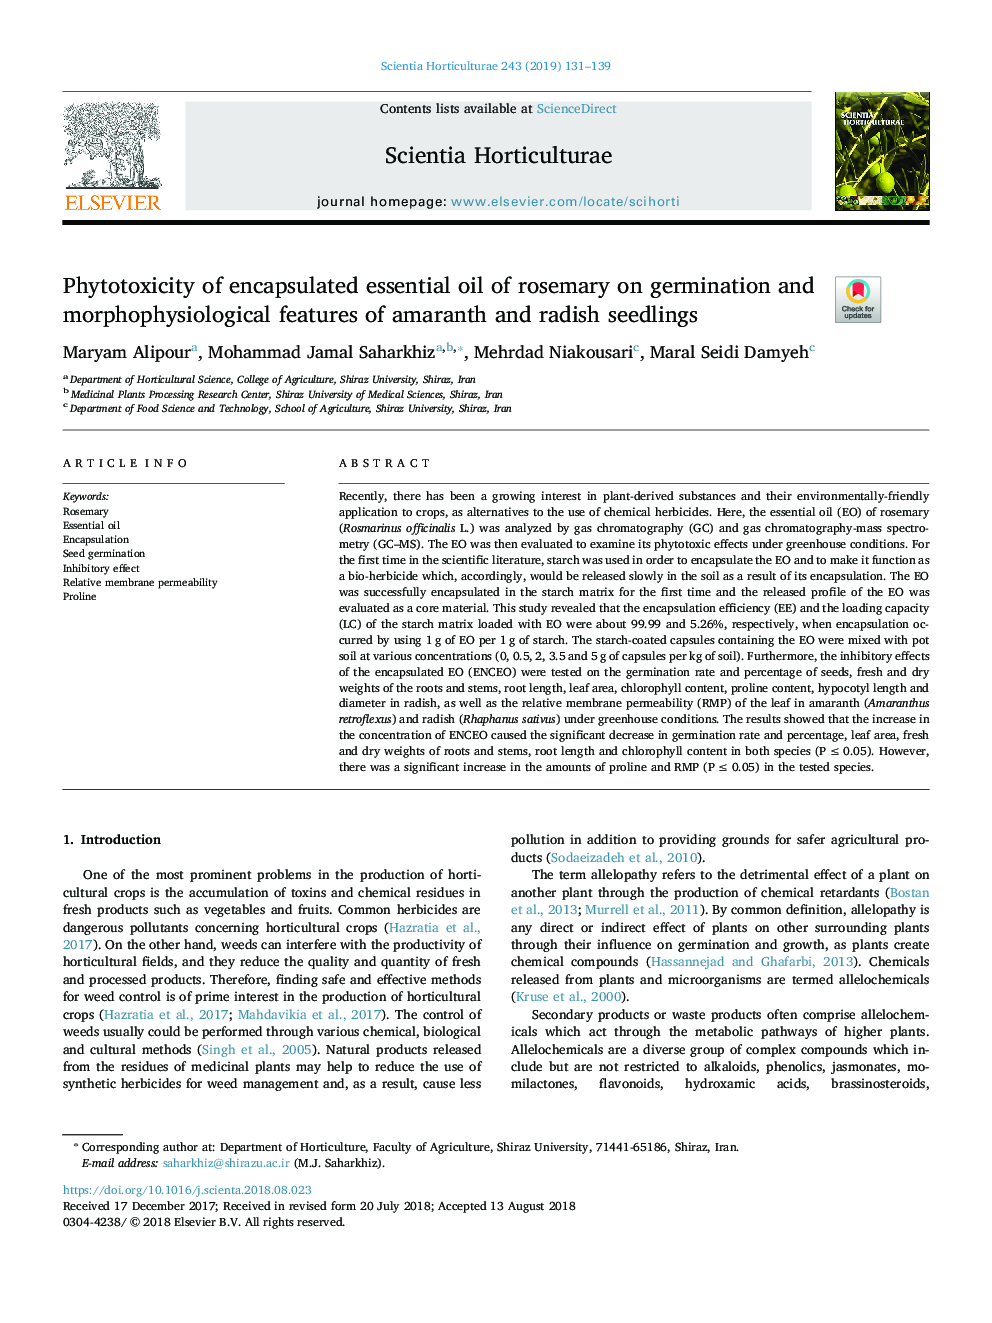 Phytotoxicity of encapsulated essential oil of rosemary on germination and morphophysiological features of amaranth and radish seedlings